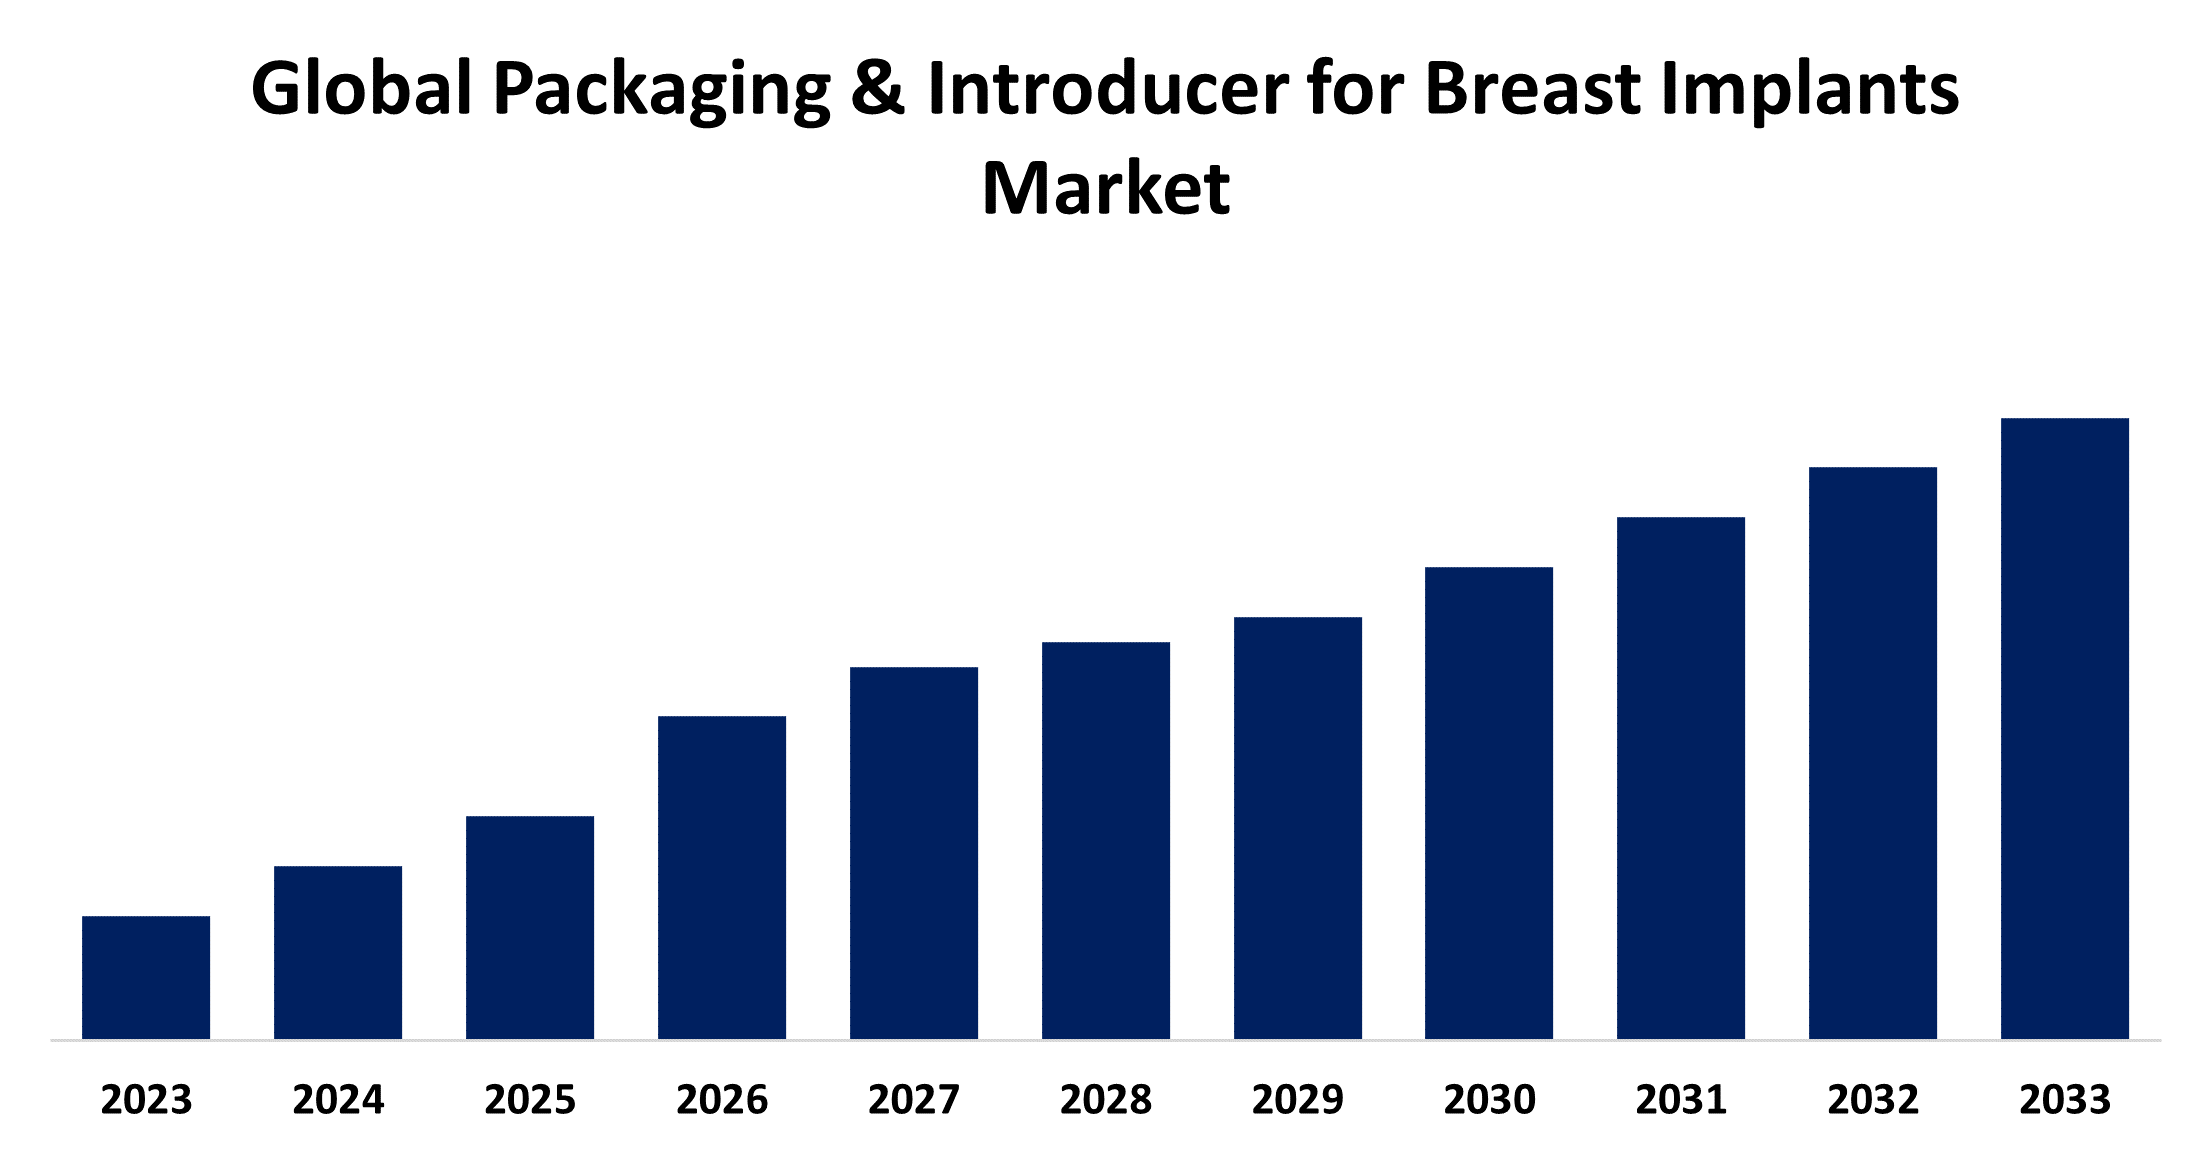 Global Packaging & Introducer for Breast Implants Market